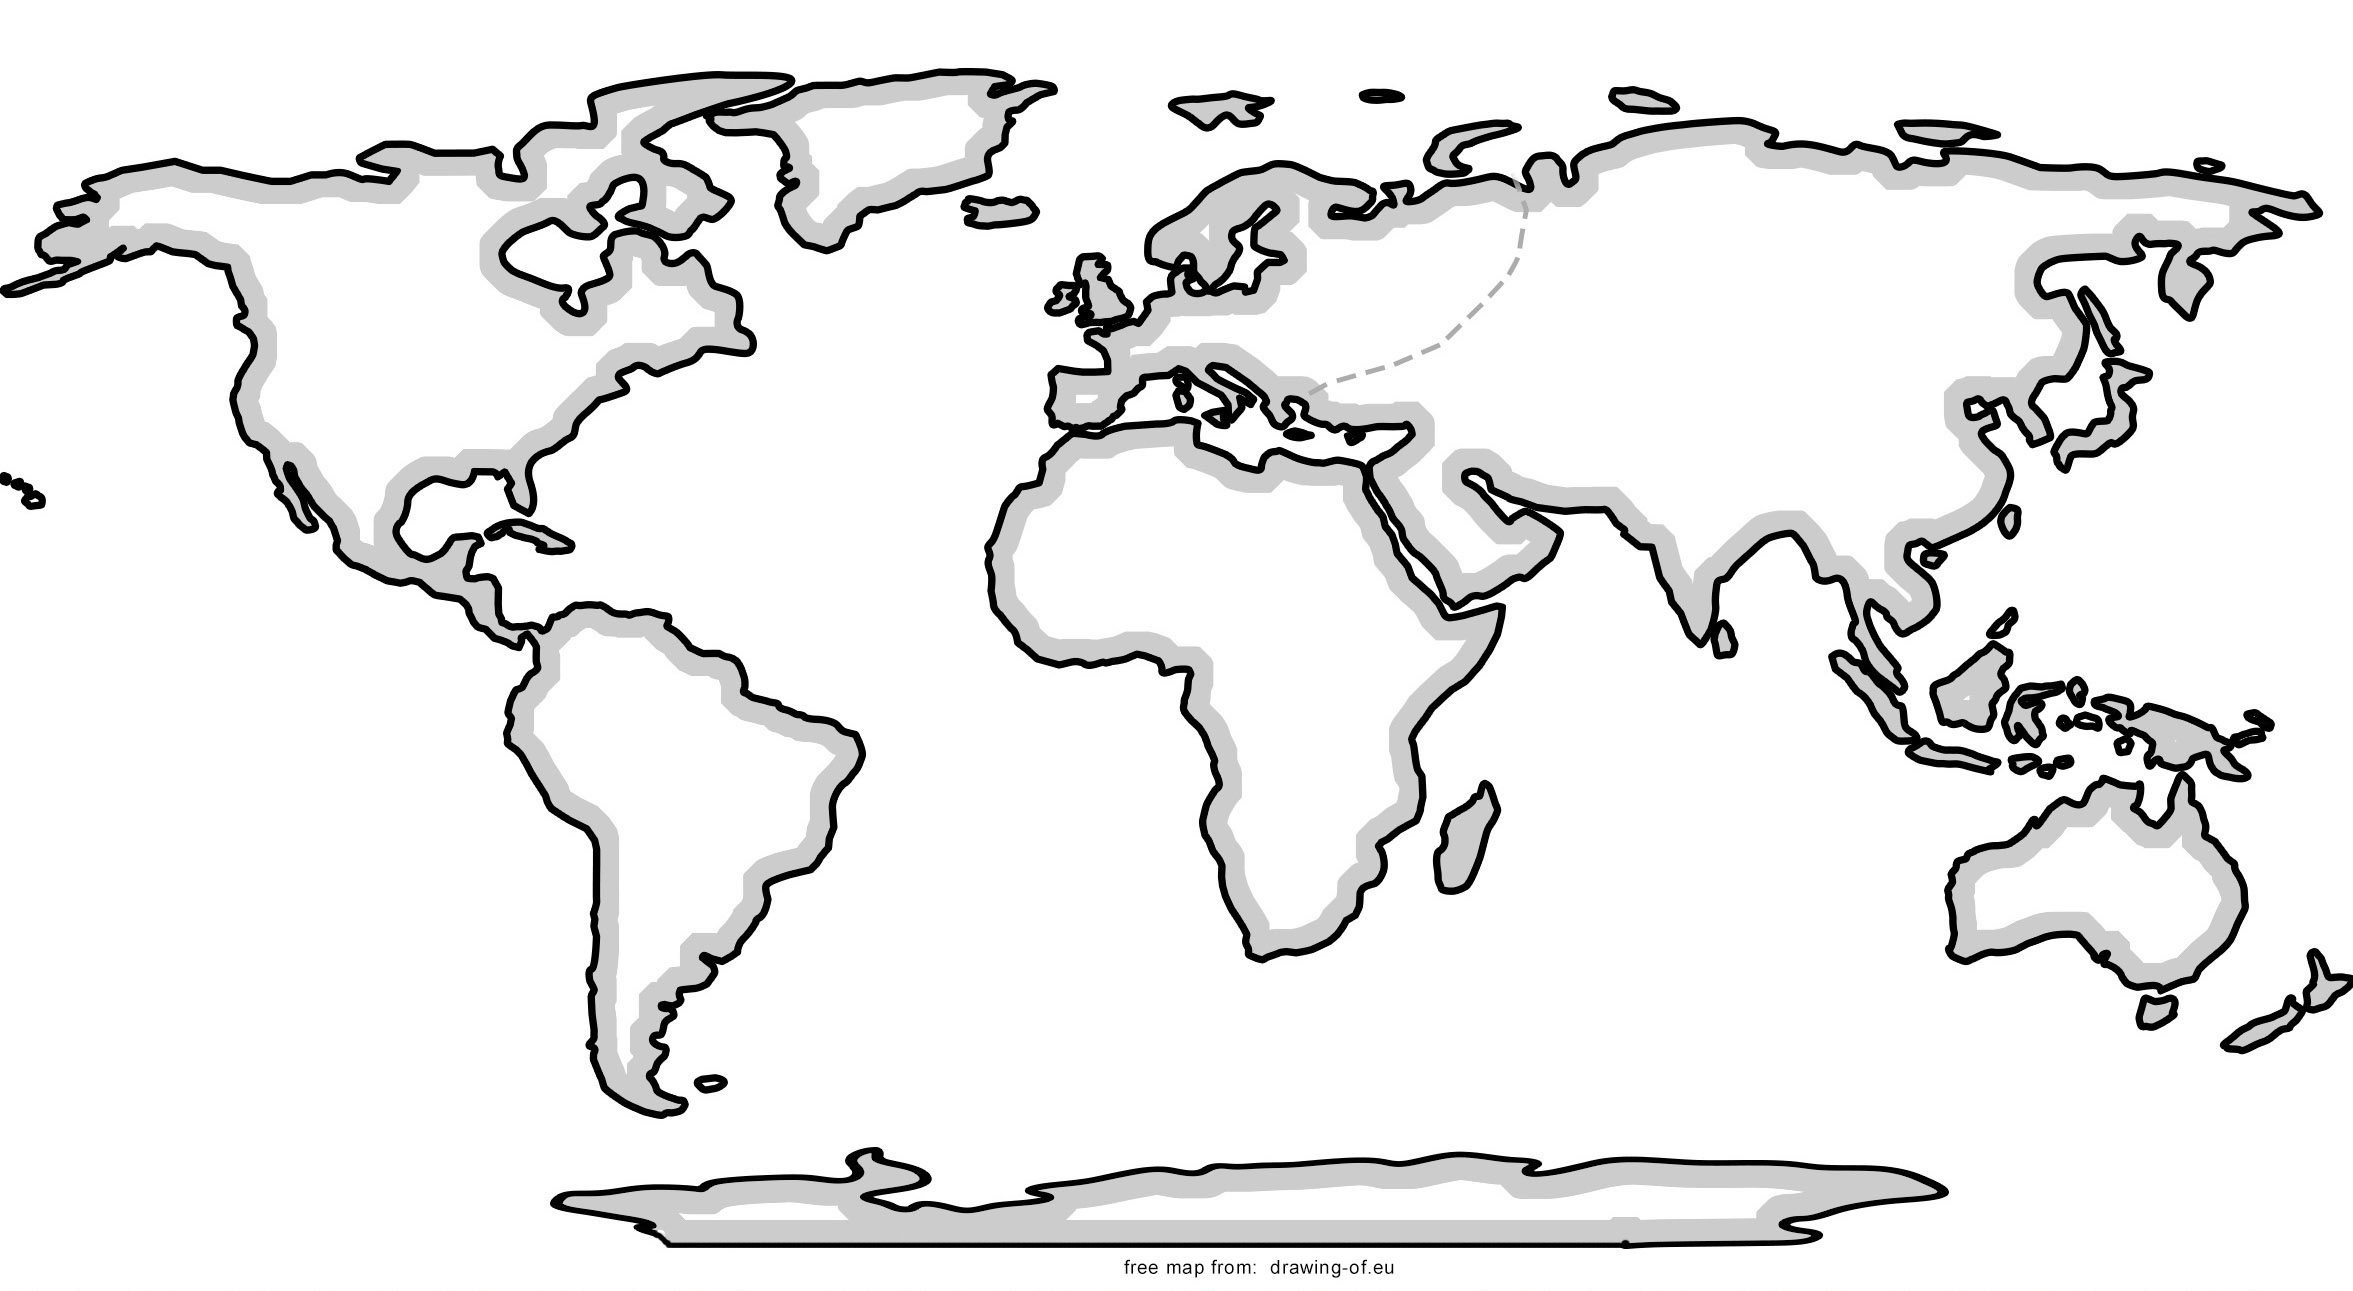 world map for print or powerpoint